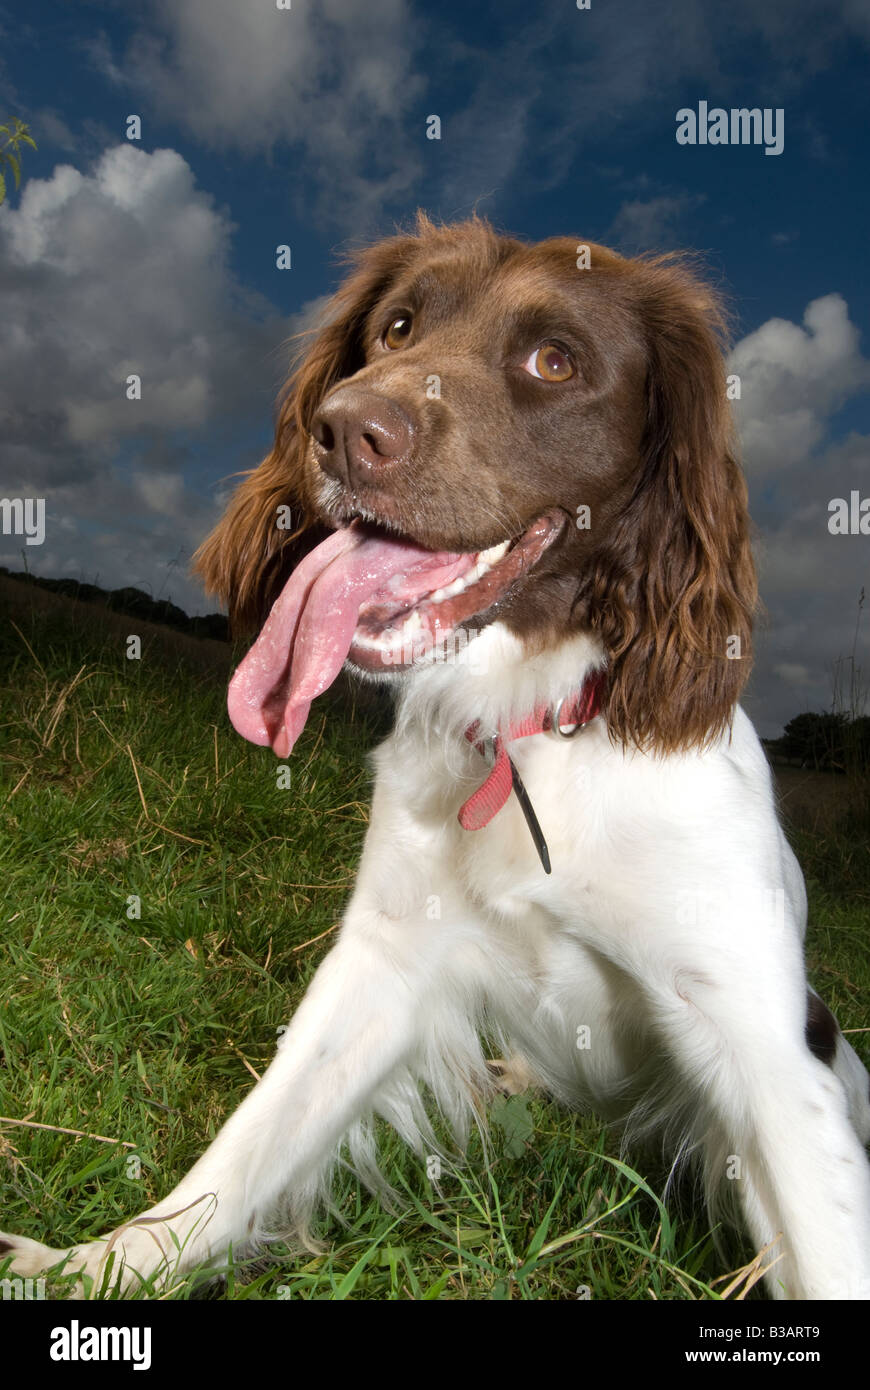 Gun Dog, Springer Spaniel Photographed in a grass field, with flash light red collar. Stock Photo